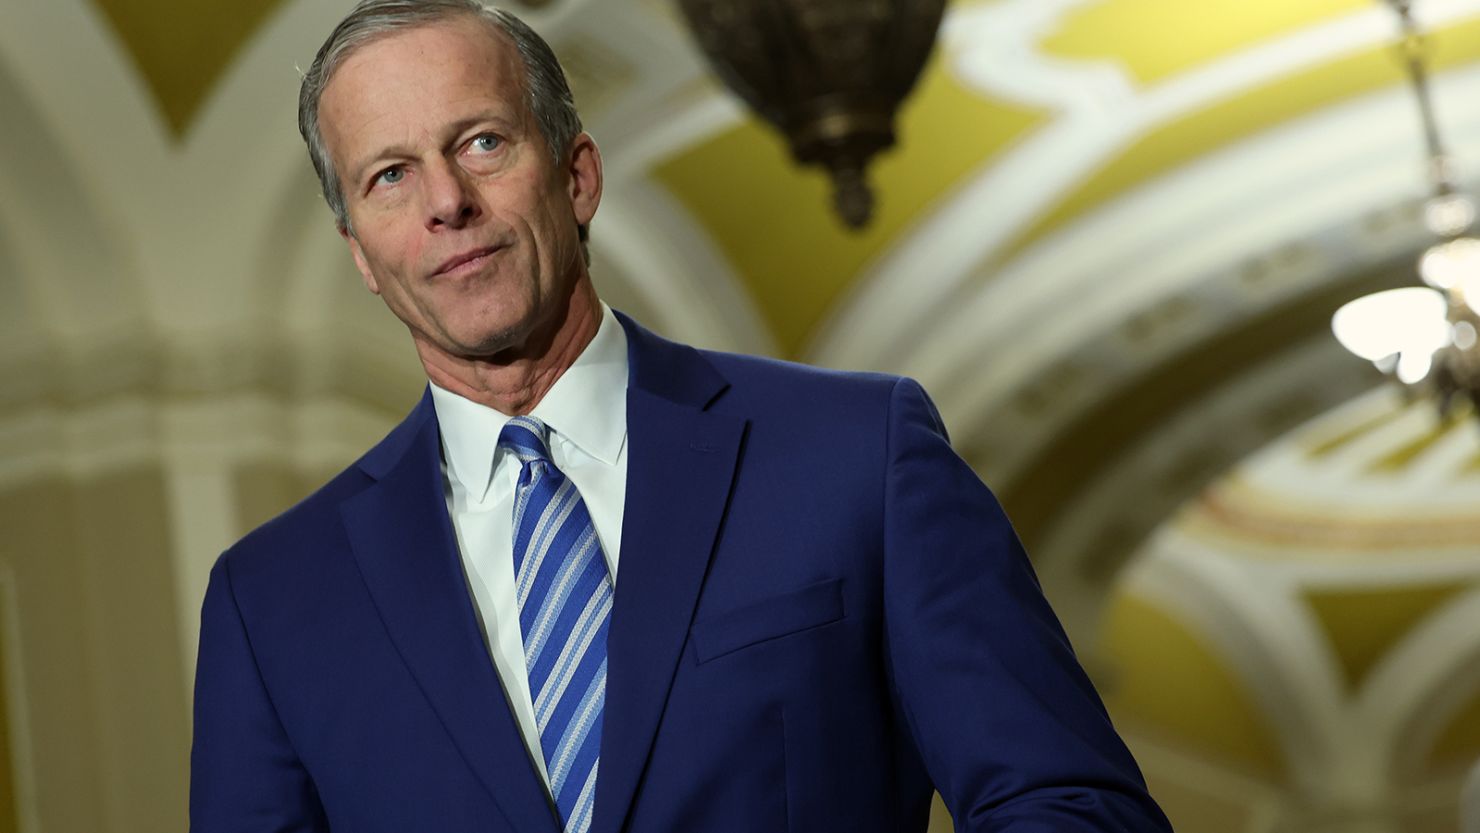 US Sen. John Thune, a Republican from South Dakota, at the US Capitol on March 28 in Washington, DC.